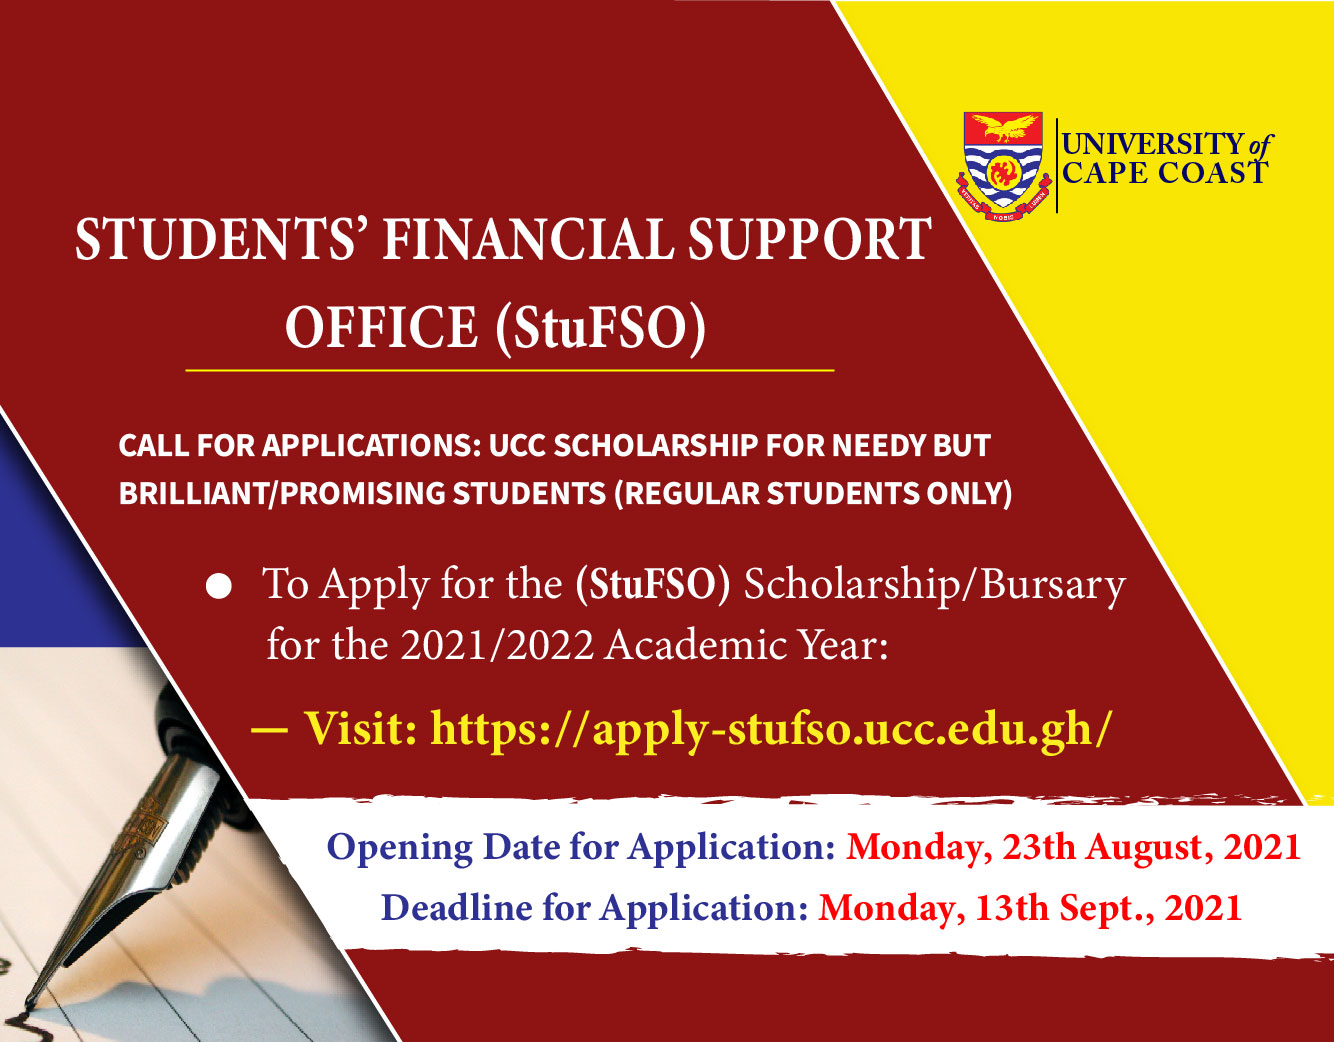 Call For Applications: UCC Scholarship For Needy But Brilliant/Promising Students (Regular Students Only)